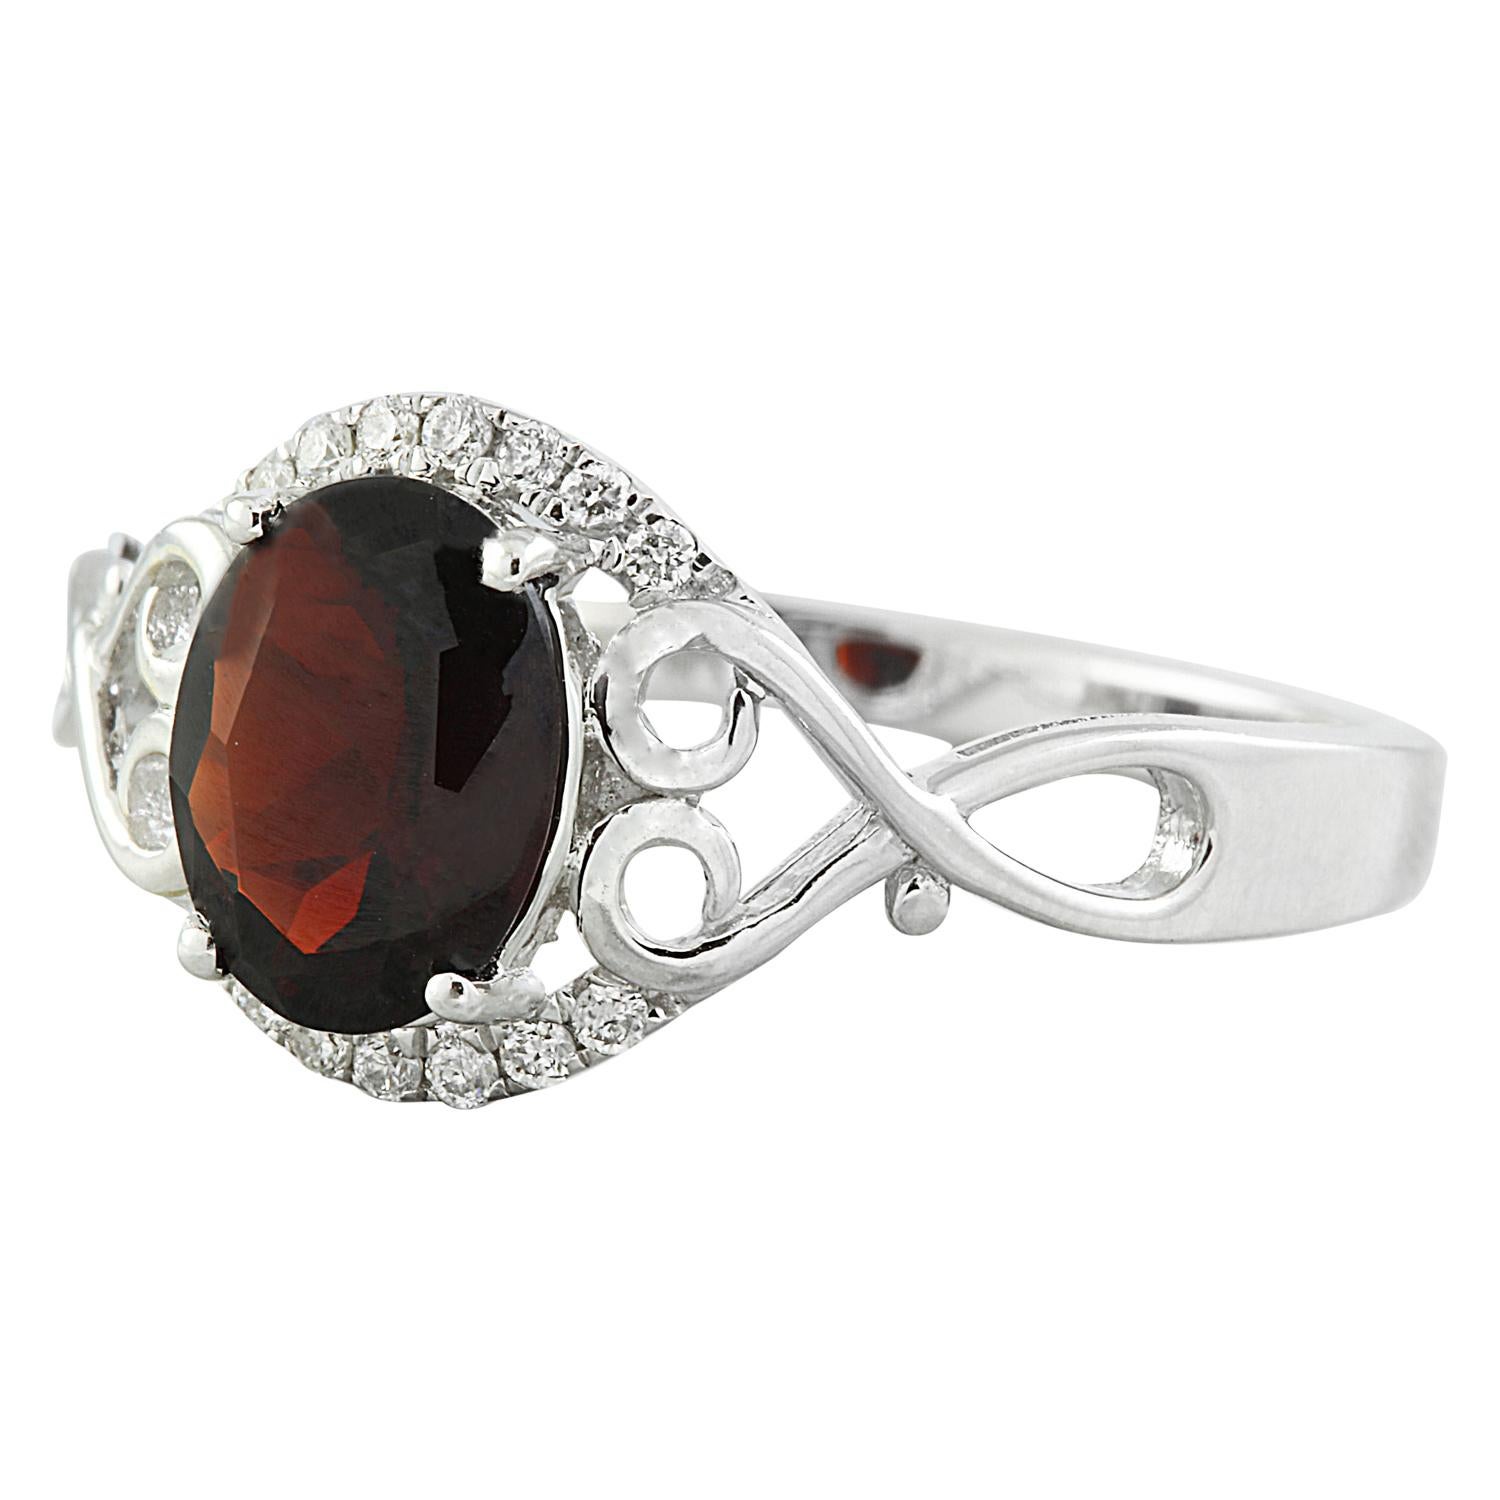 Oval Cut Exquisite Natural Garnet Diamond Ring in 14K Solid White Gold For Sale